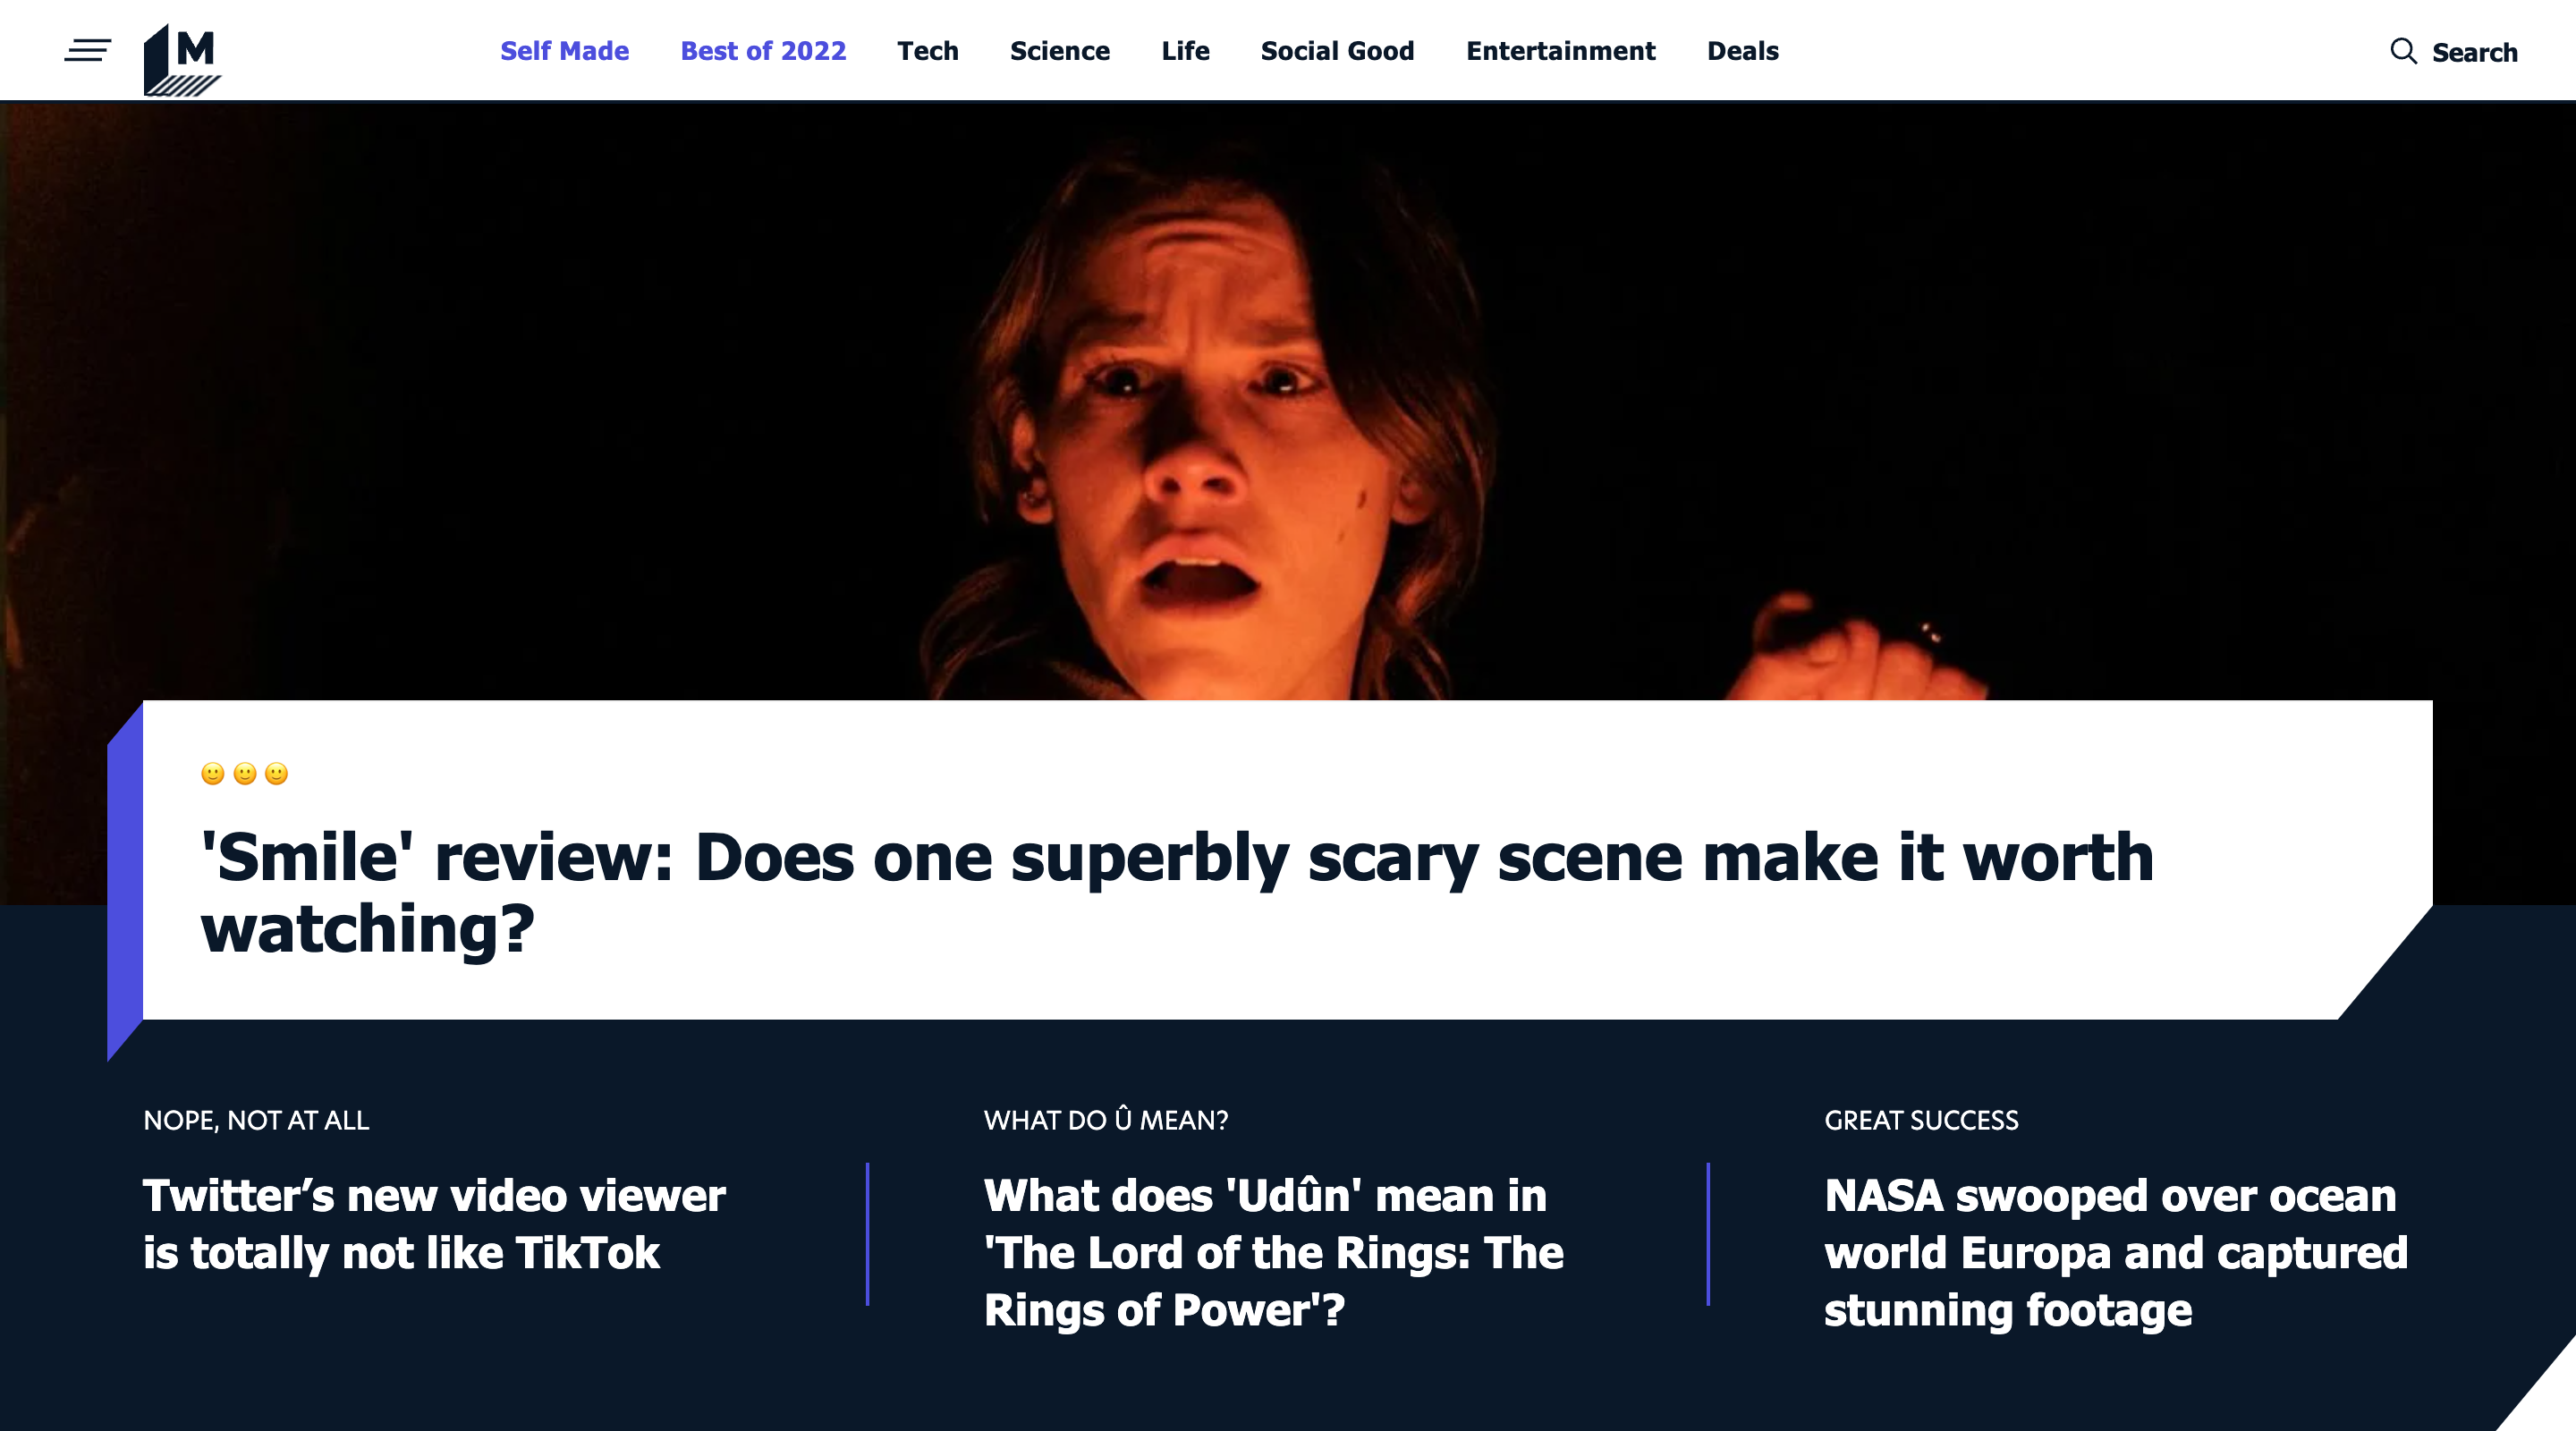 Screenshot of the Mashable home page. The header contains a menu button, the Mashable logo, the main site navigation, and a search button. The hero section contains a featured article with a large background image and heading. Three additional article titles are displayed in a row underneath.